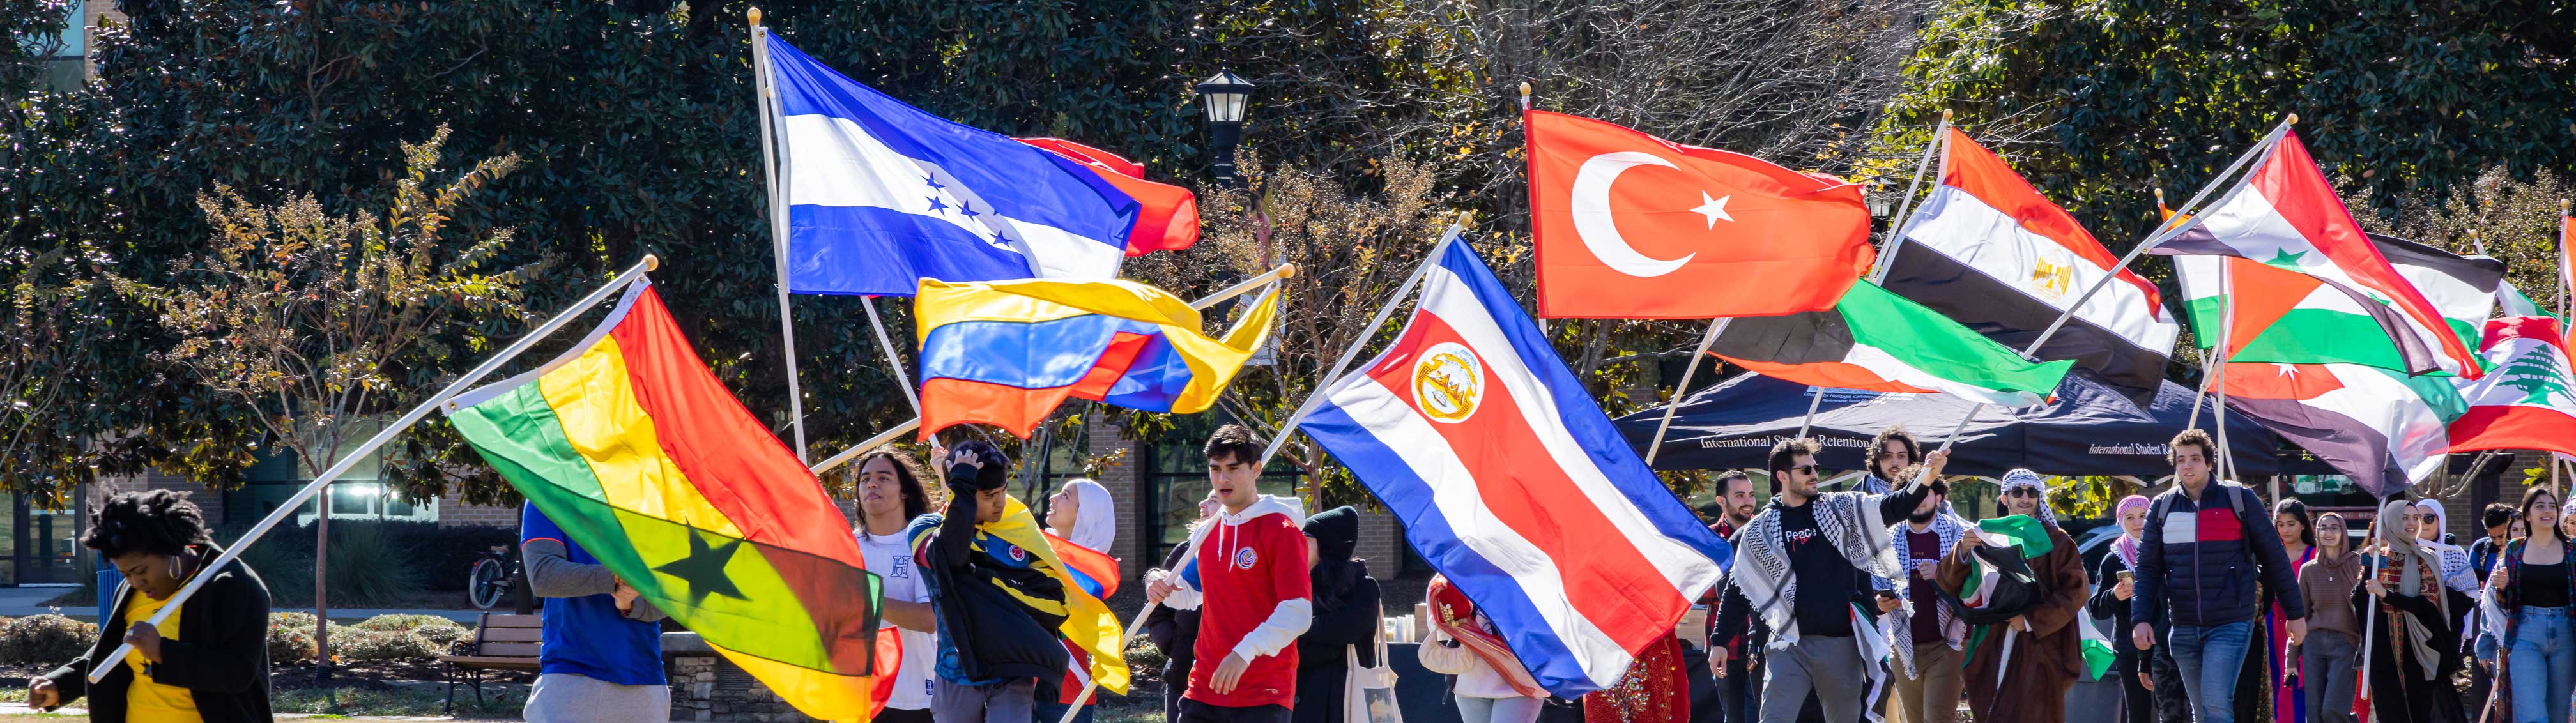 international student carrying various country's flags across ksu green